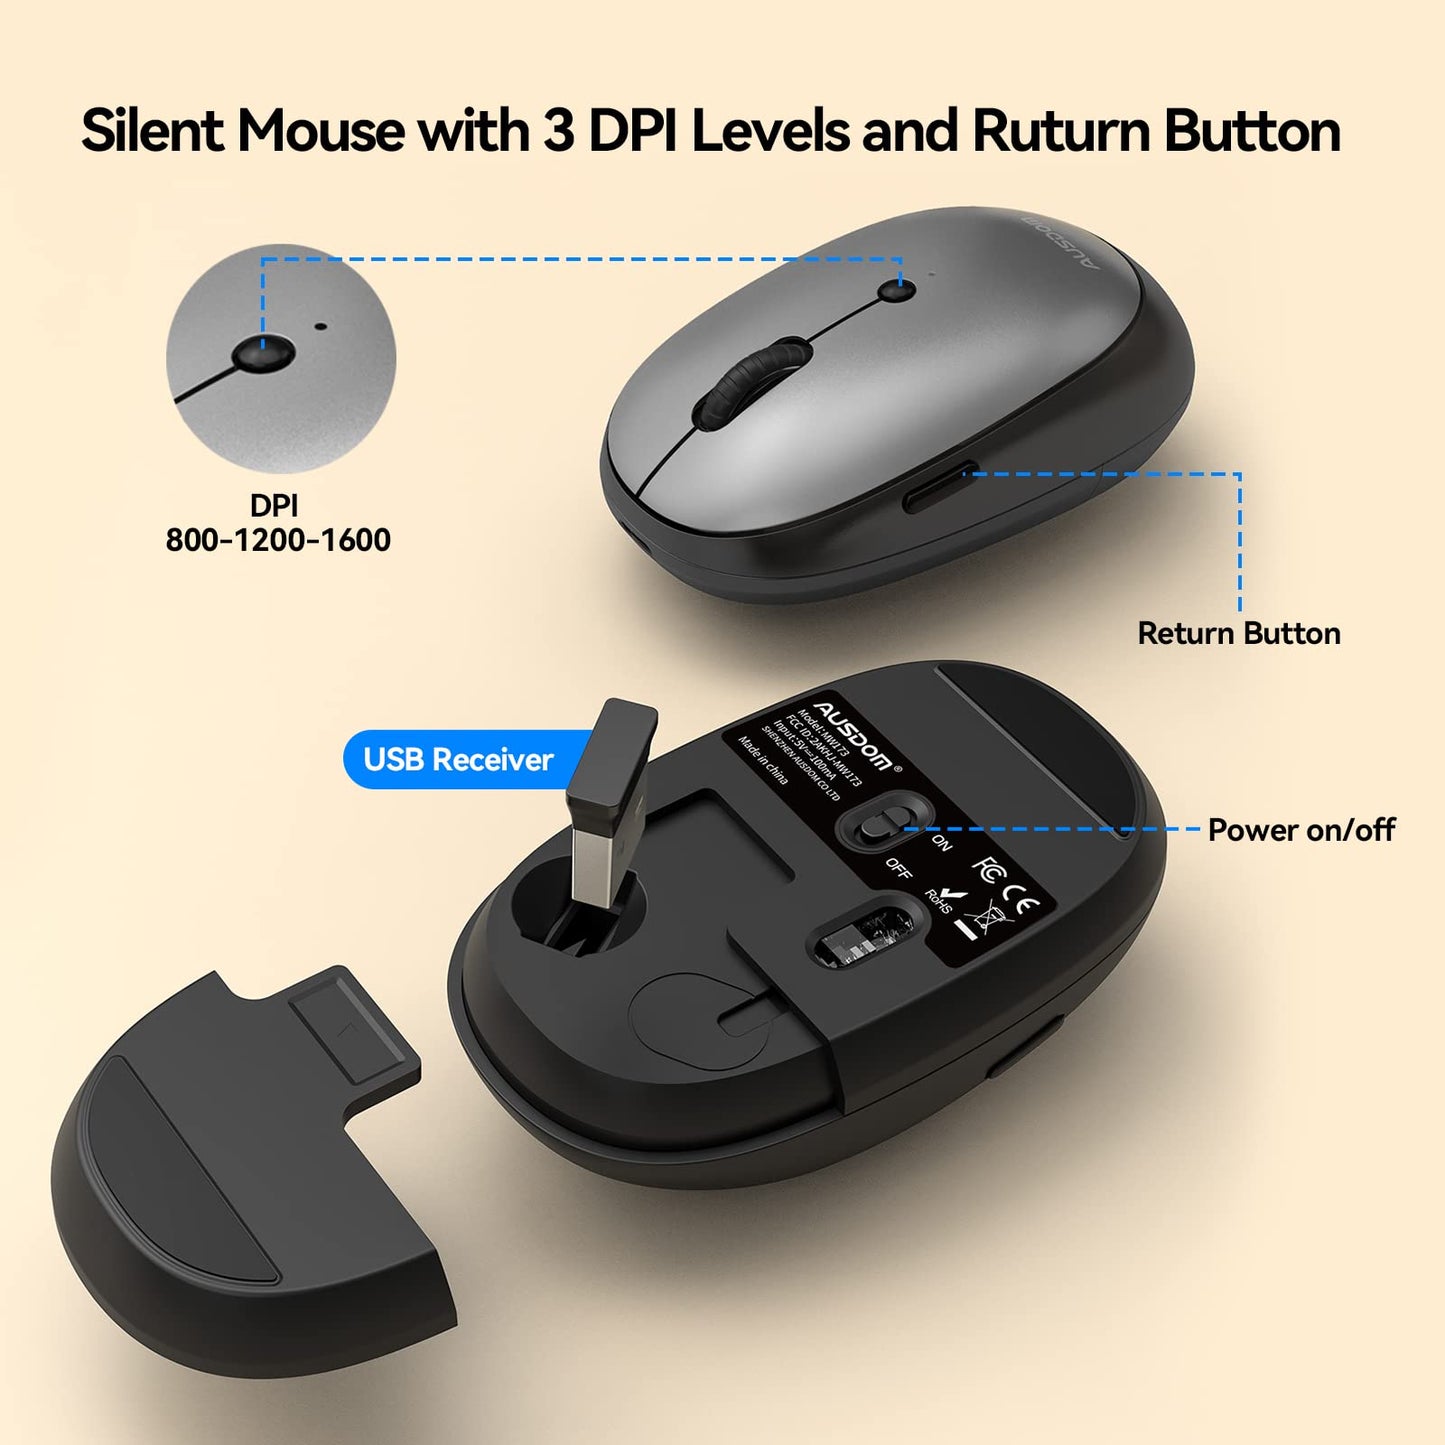 AUSDOM Wireless Keyboard and Mouse Combo: 2.4Ghz Cordless Silent Keyboard Mouse Set, Rechargeable Slim Quiet Full Size Keyboard with 3 DPI Adjustable Mouse, Thin Sleek Design for Windows